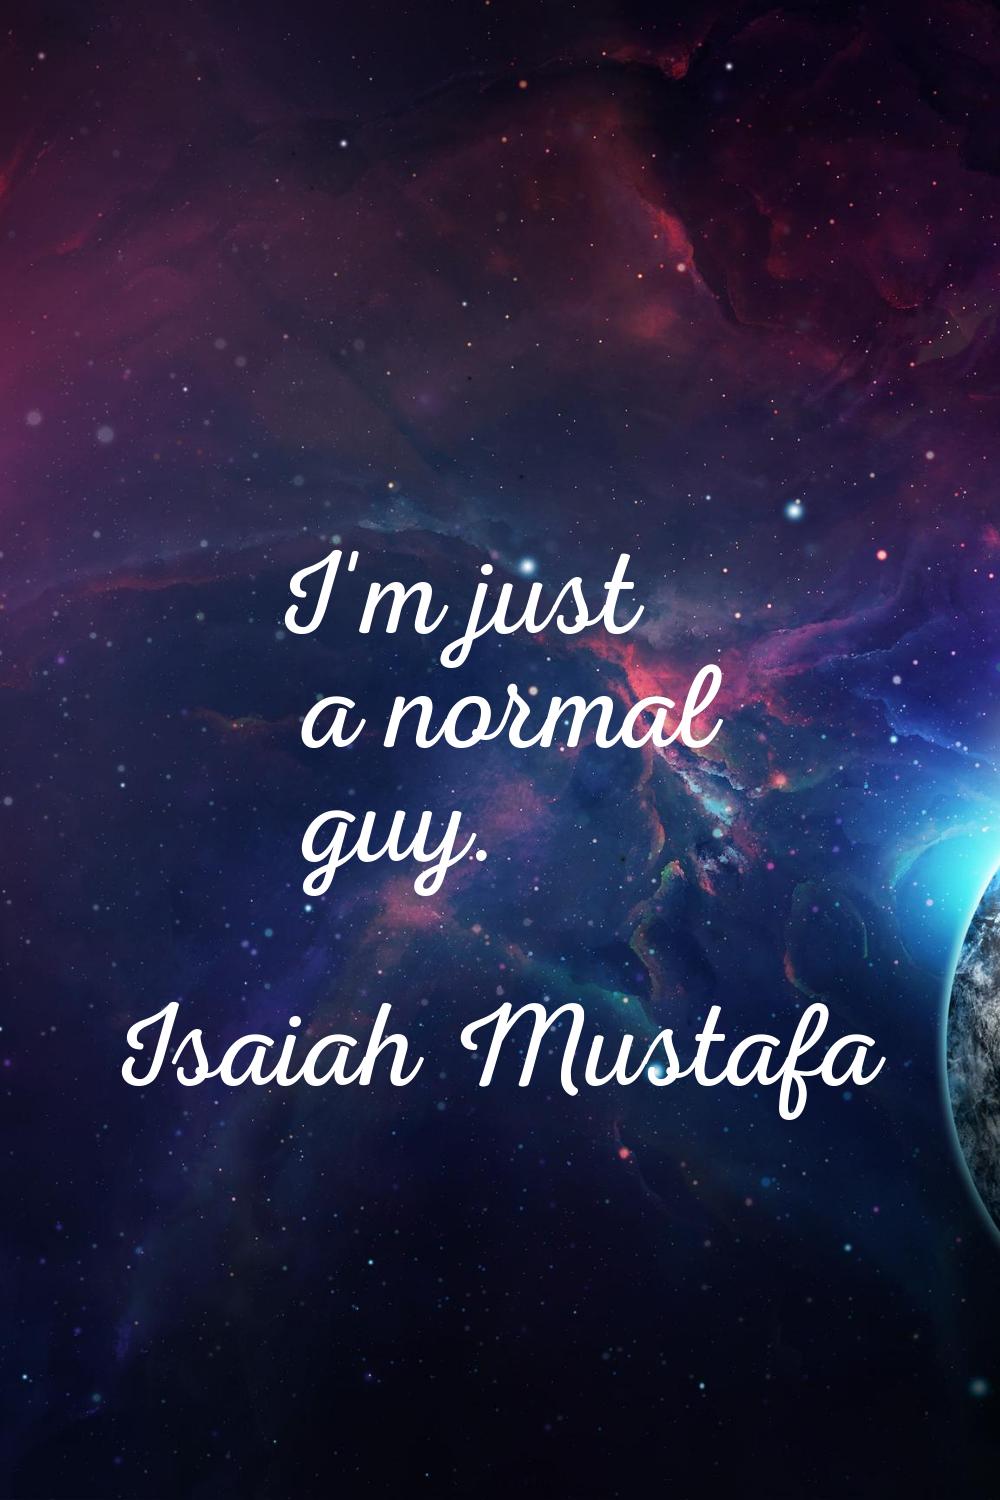 I'm just a normal guy.